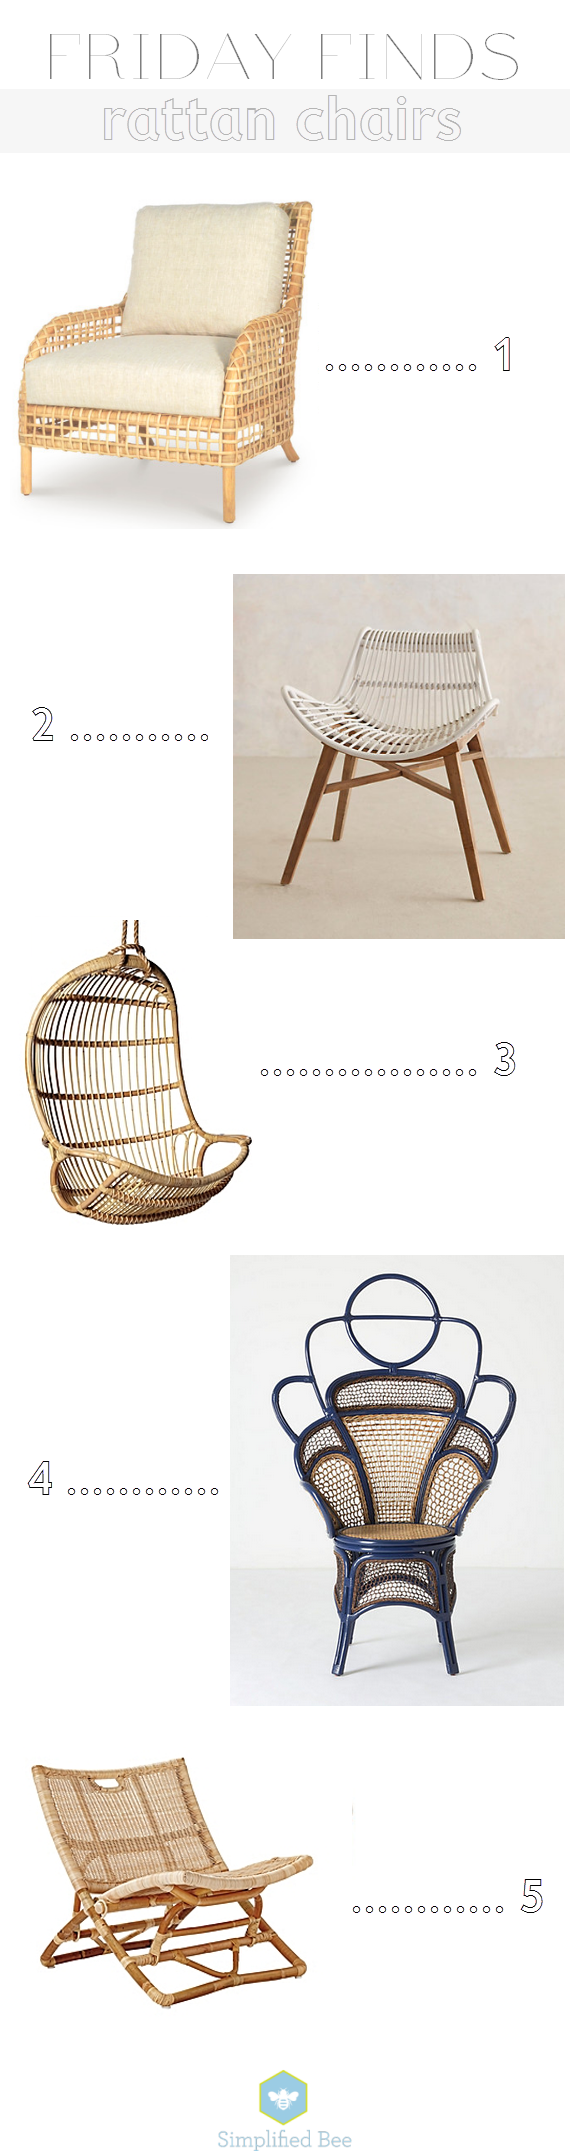 statement rattan chairs // simplified bee #design #chairs #rattan